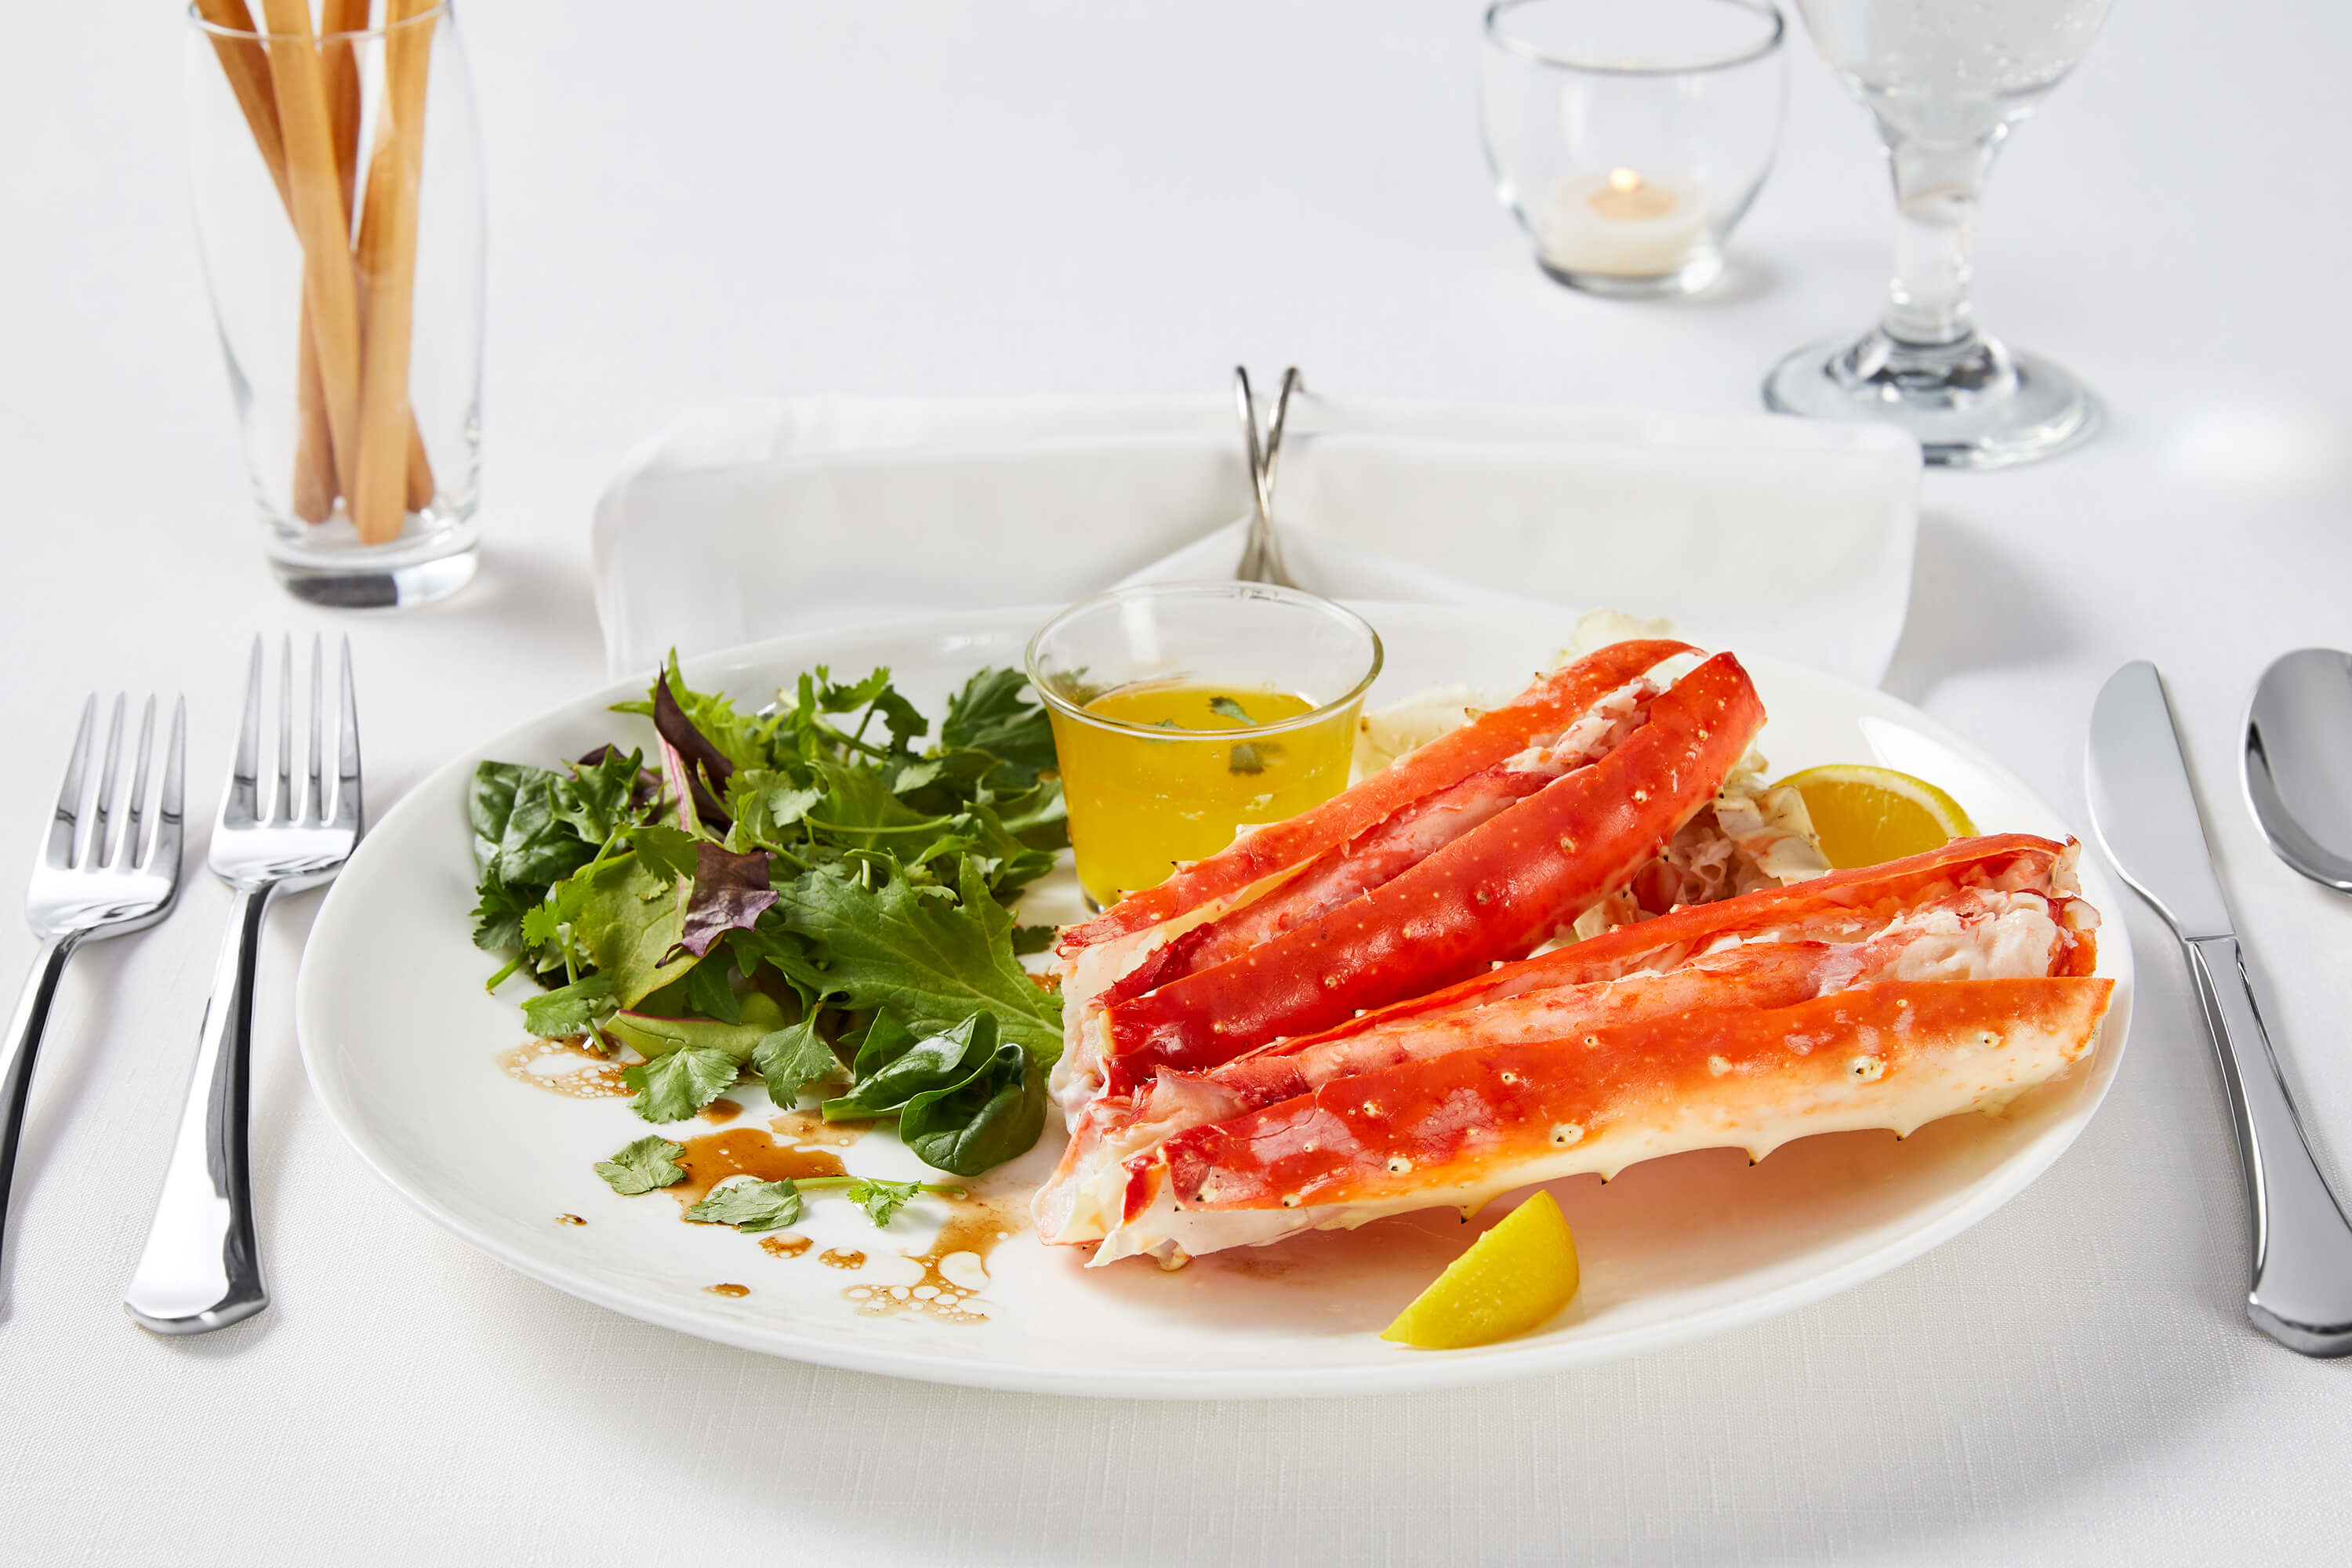 Colossal King Crab Legs with Garlic Butter - Pacific Seafood